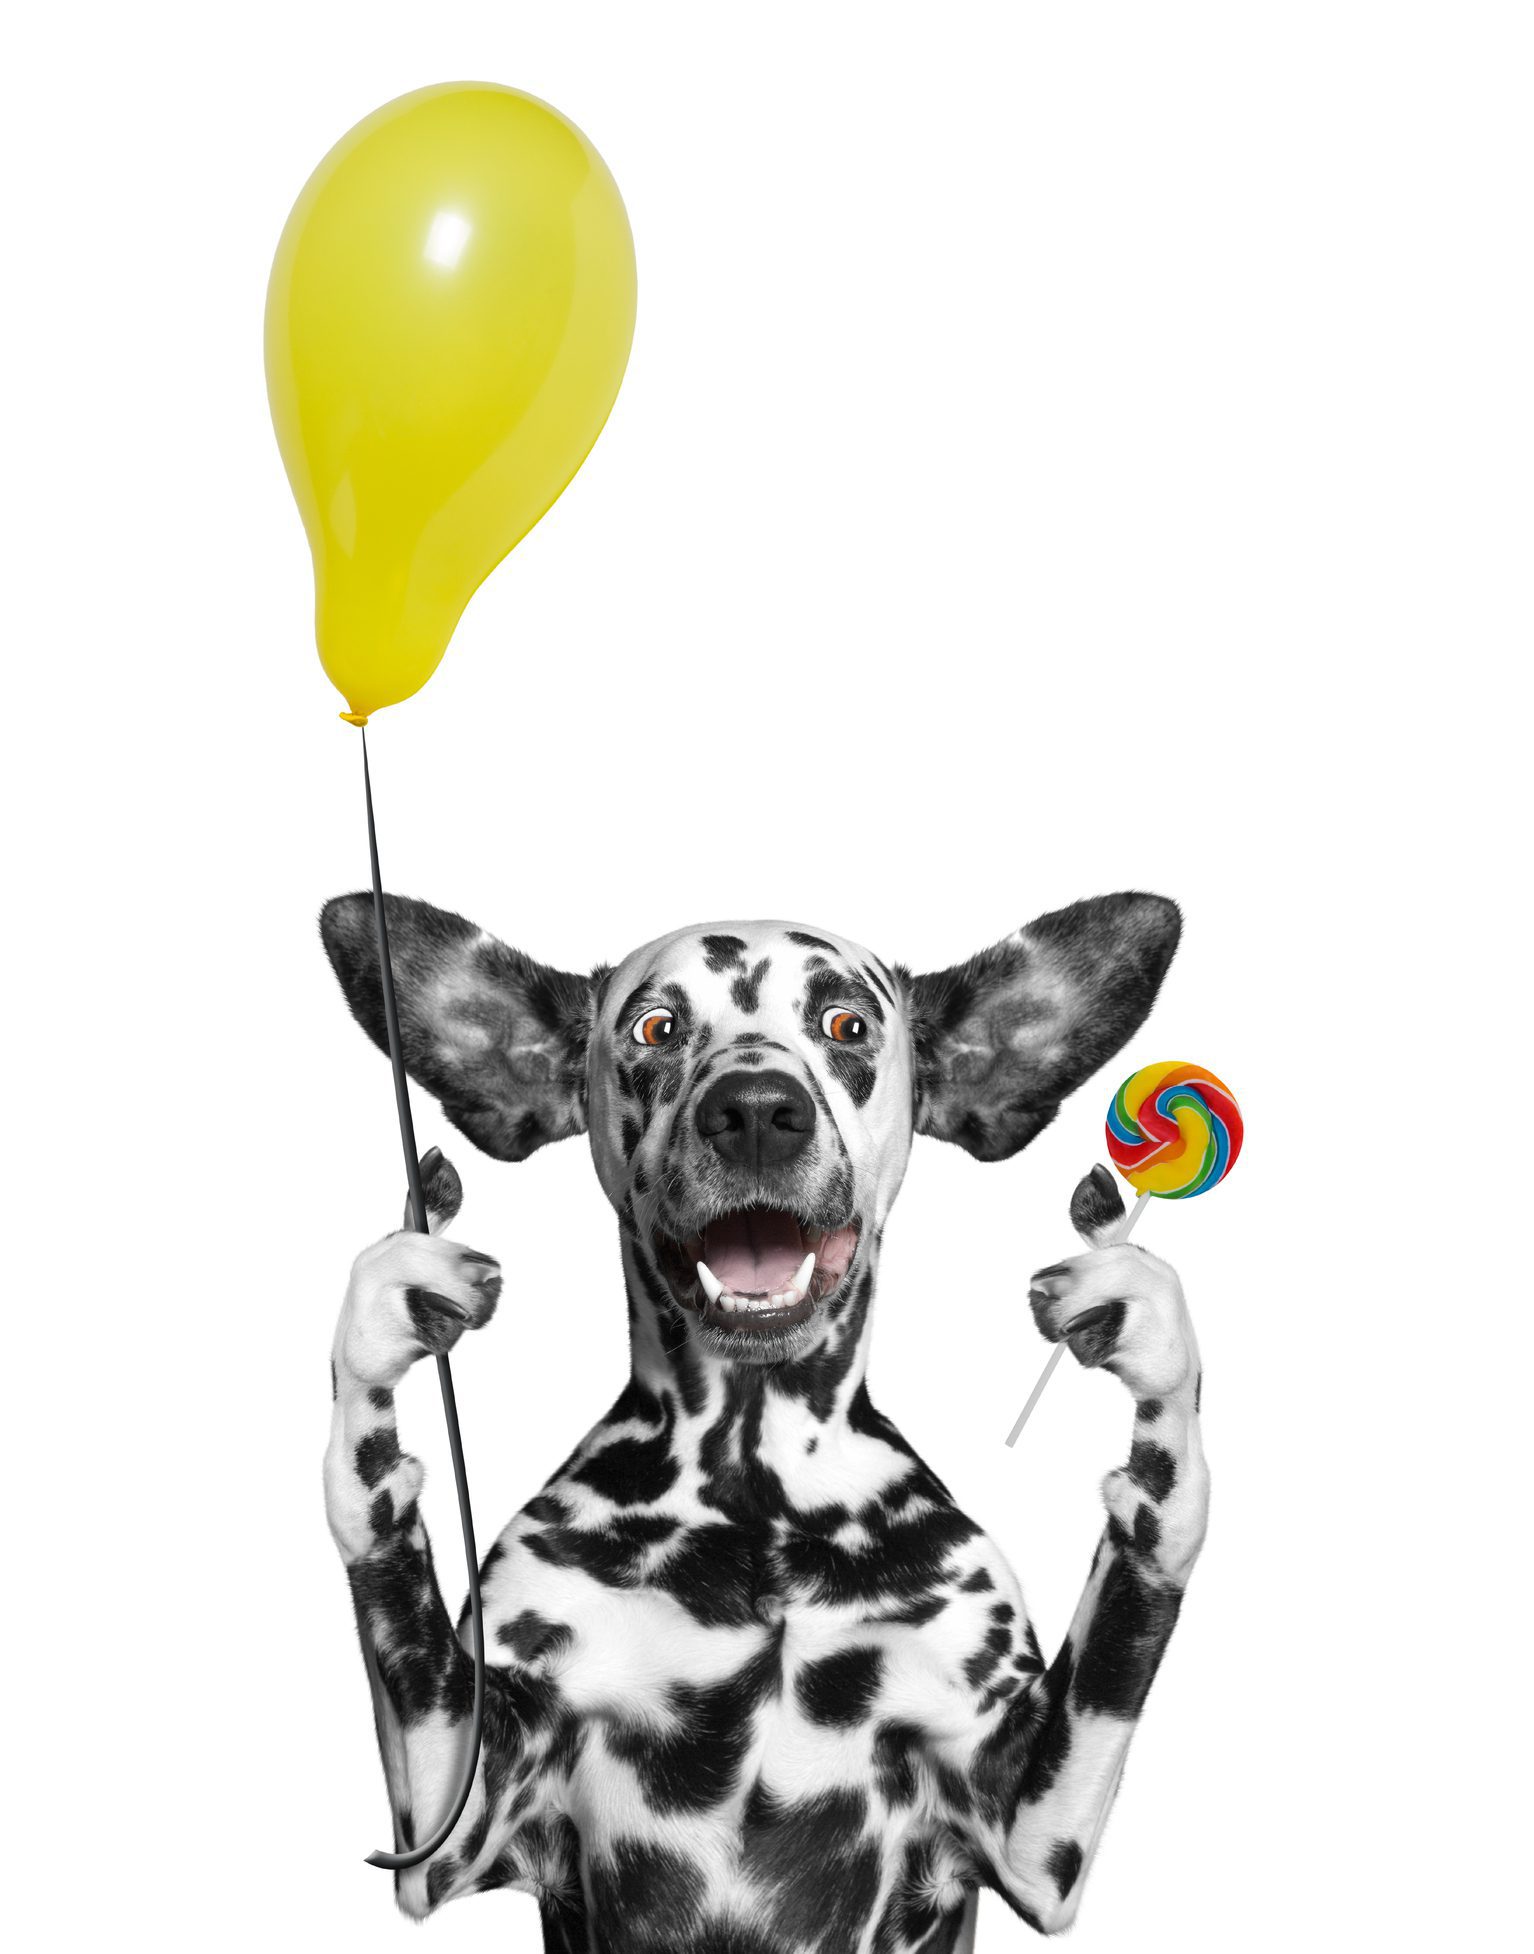 Cute dog with balloon and lollipop